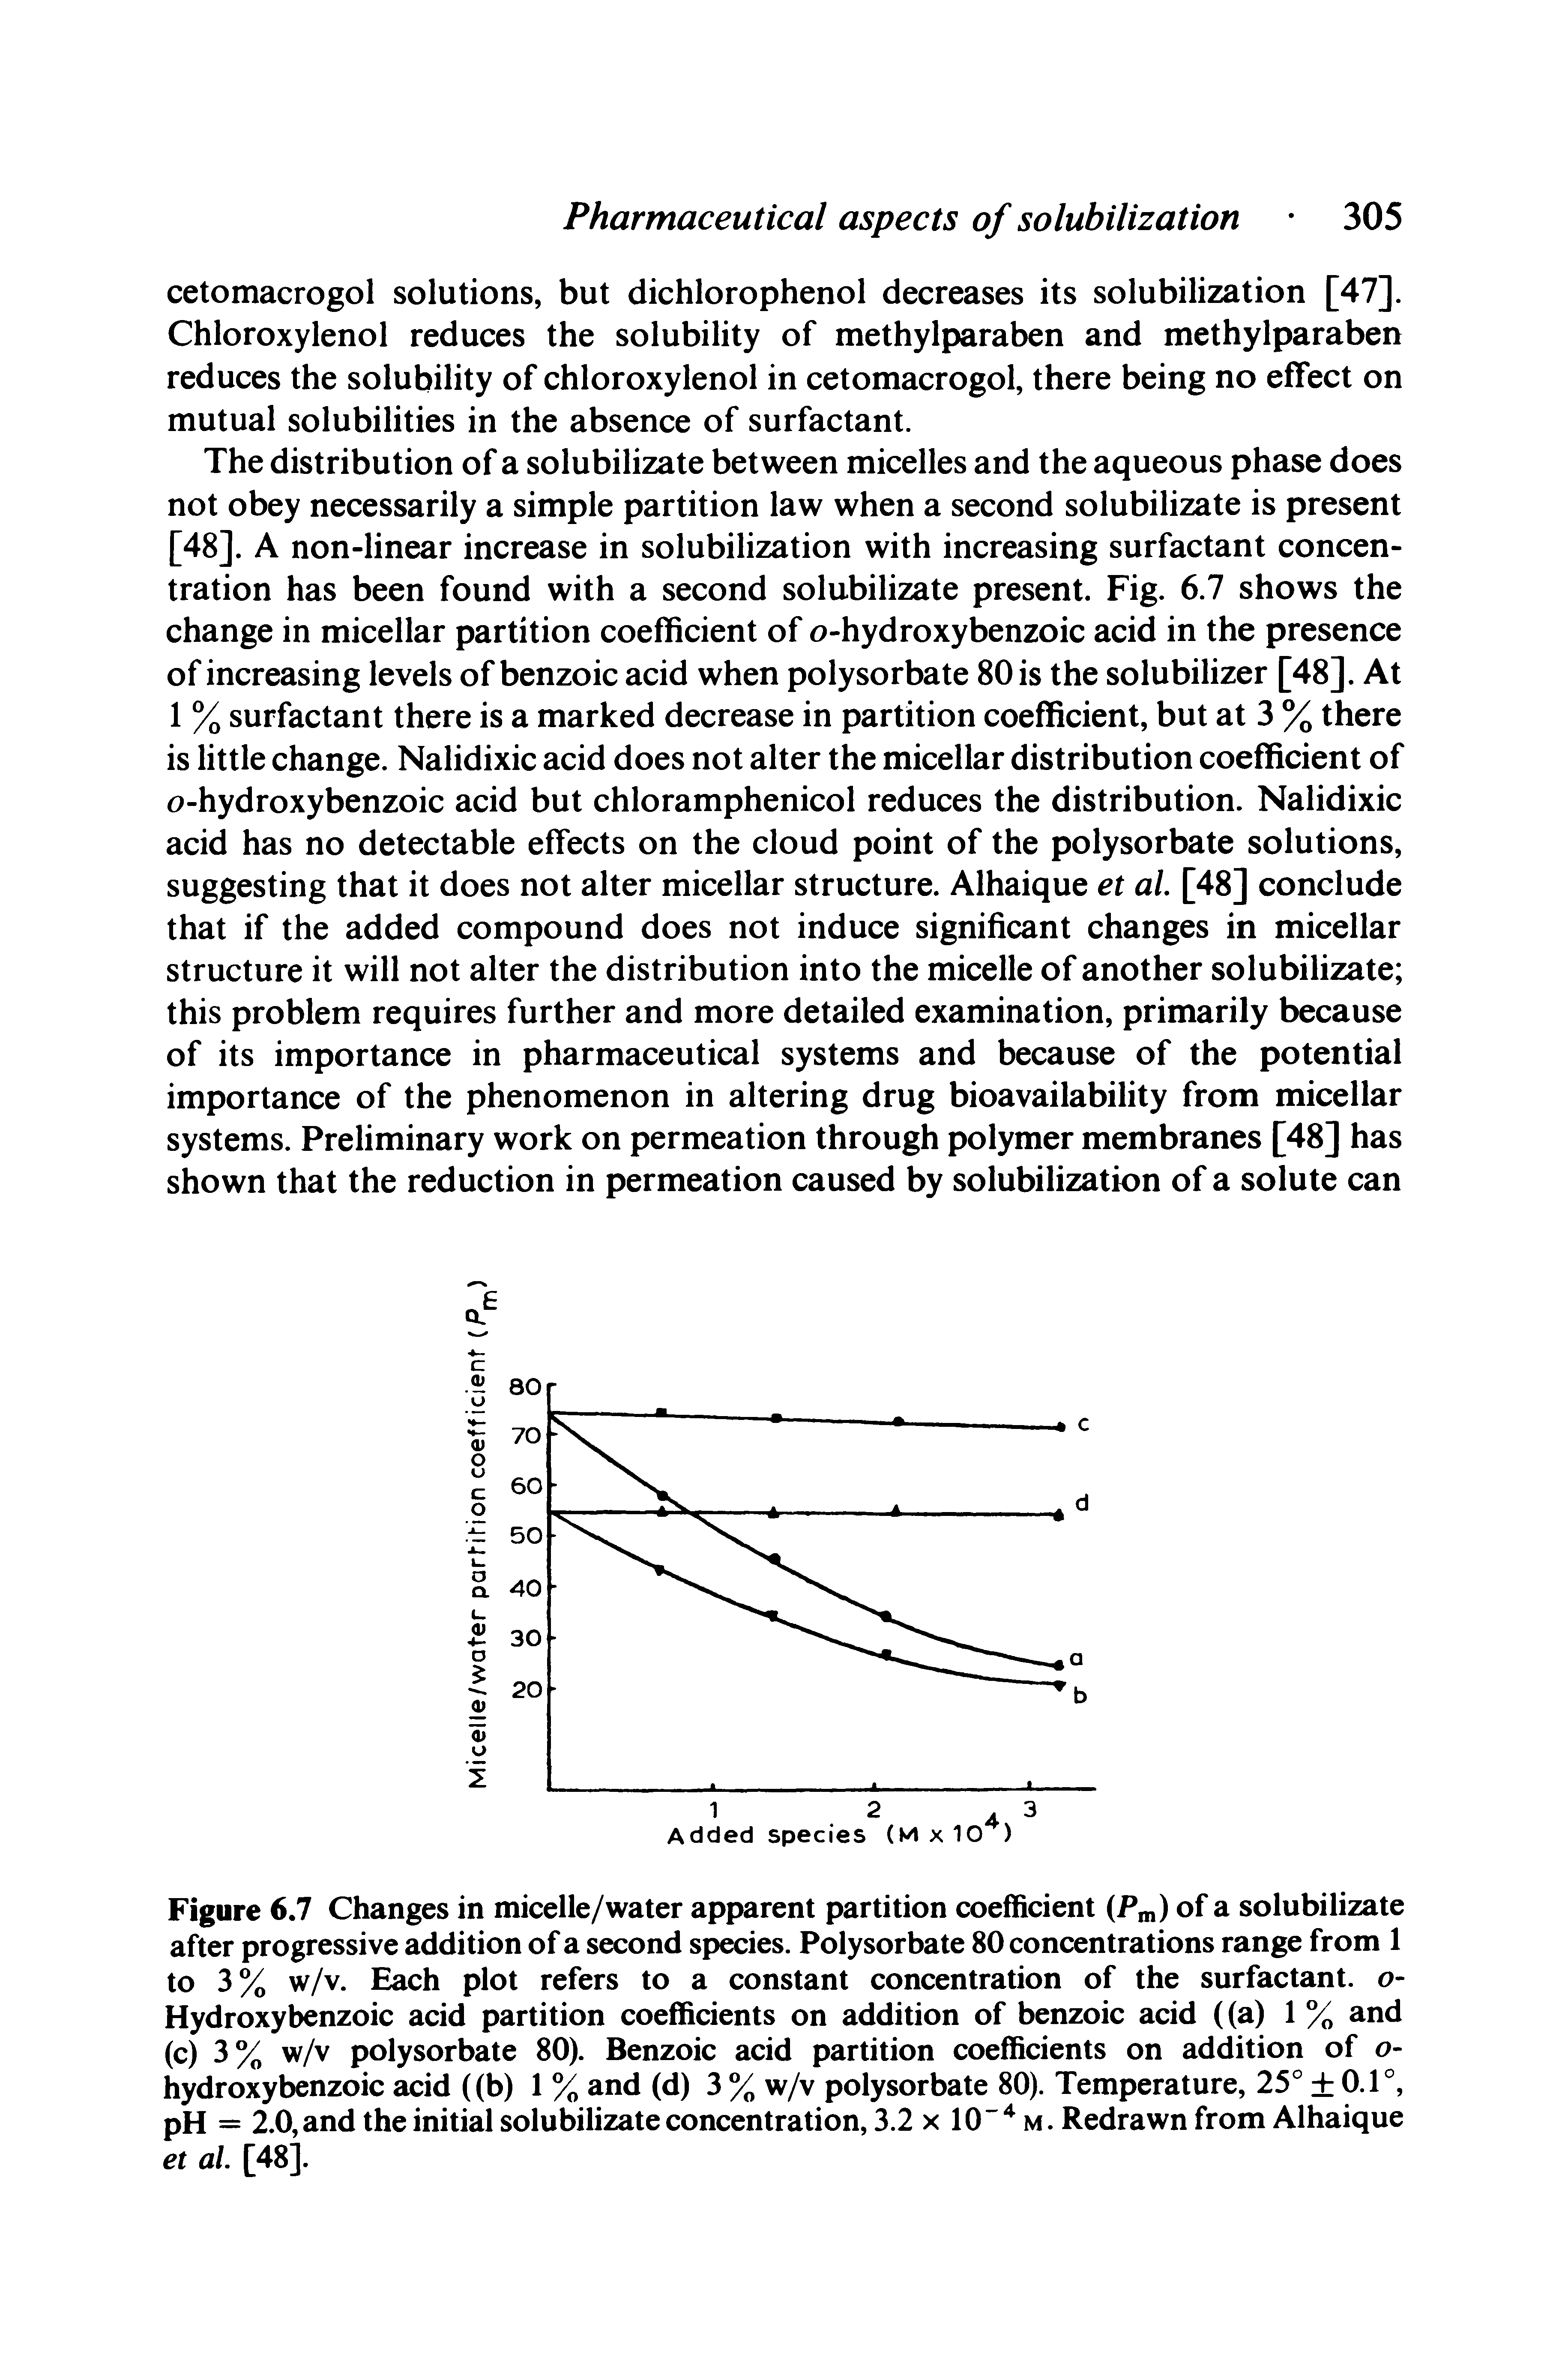 Figure 6.7 Changes in micelle/water apparent partition coefficient (Pm) of a solubilizate after progressive addition of a second species. Polysorbate 80 concentrations range from 1 to 3% w/v. Each plot refers to a constant concentration of the surfactant, o-Hydroxybenzoic acid partition coefficients on addition of benzoic acid ((a) 1 % and (c) 3% w/v polysorbate 80). Benzoic acid partition coefficients on addition of o-hydroxybenzoic acid ((b) 1 % and (d) 3 % w/v polysorbate 80). Temperature, 25° 0.1°, pH = 2.0,and the initial solubilizate concentration, 3.2 x lO"" m. Redrawn from Alhaique et al [48].